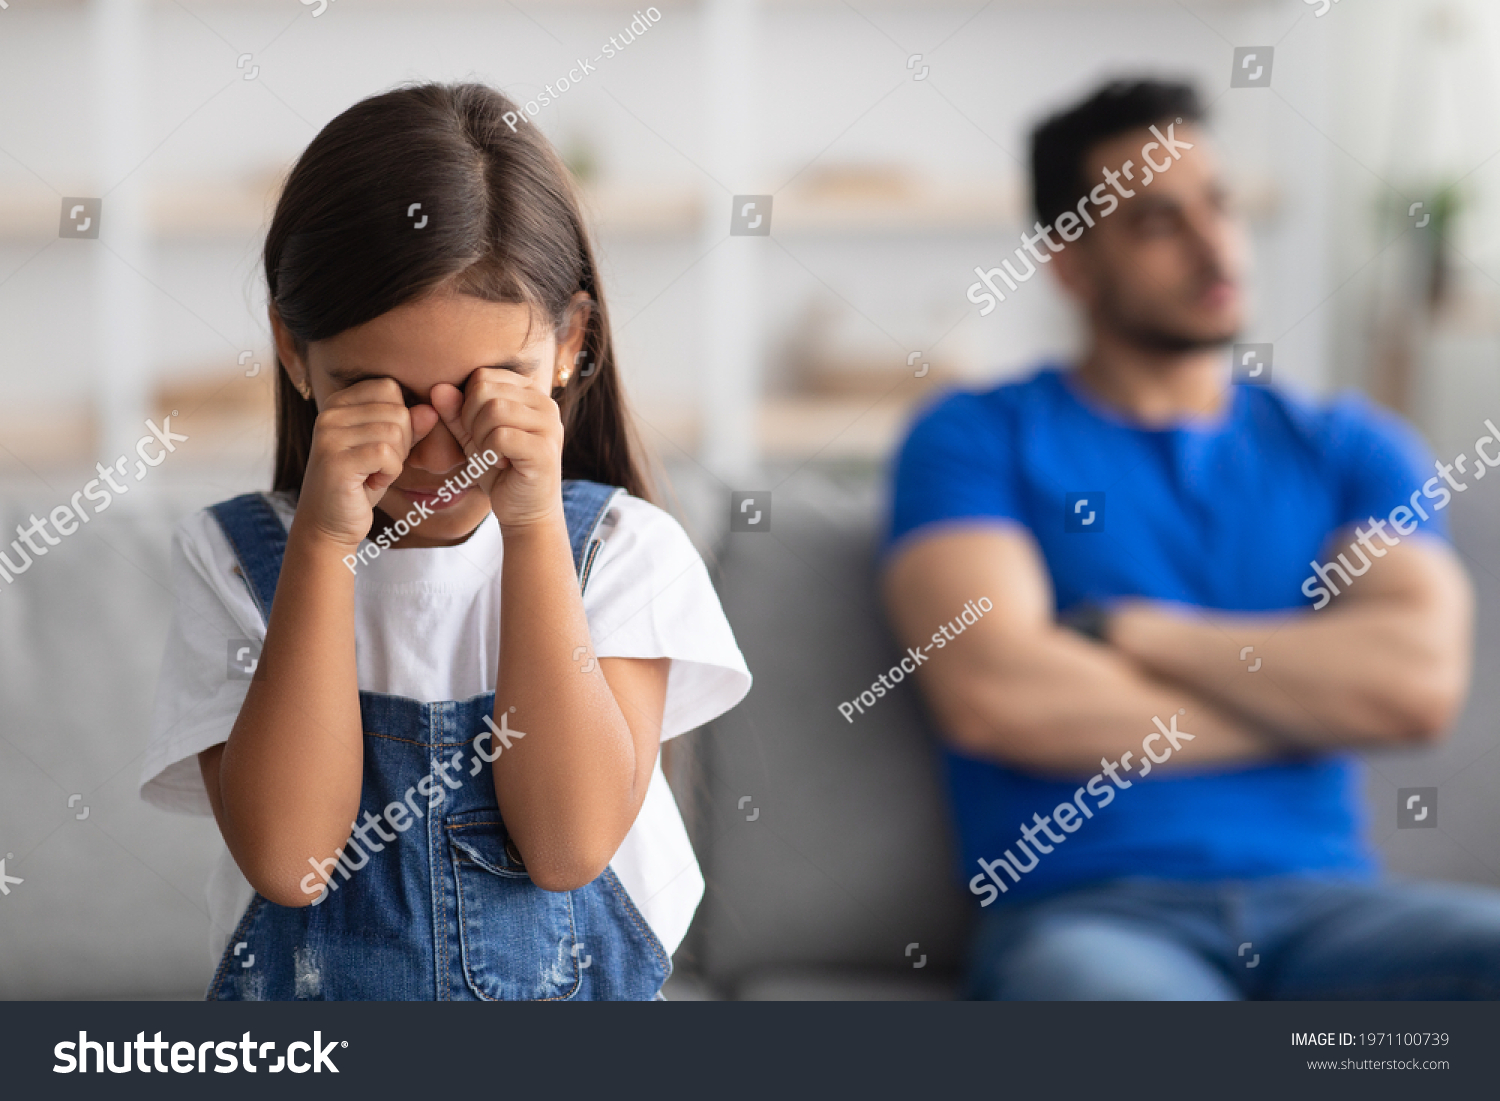 Family Relationship Problems. Selective focus on offended crying little kid girl wiping tears, young father sitting separate on couch in the blurred background, ignoring daughter. Generations gap #1971100739